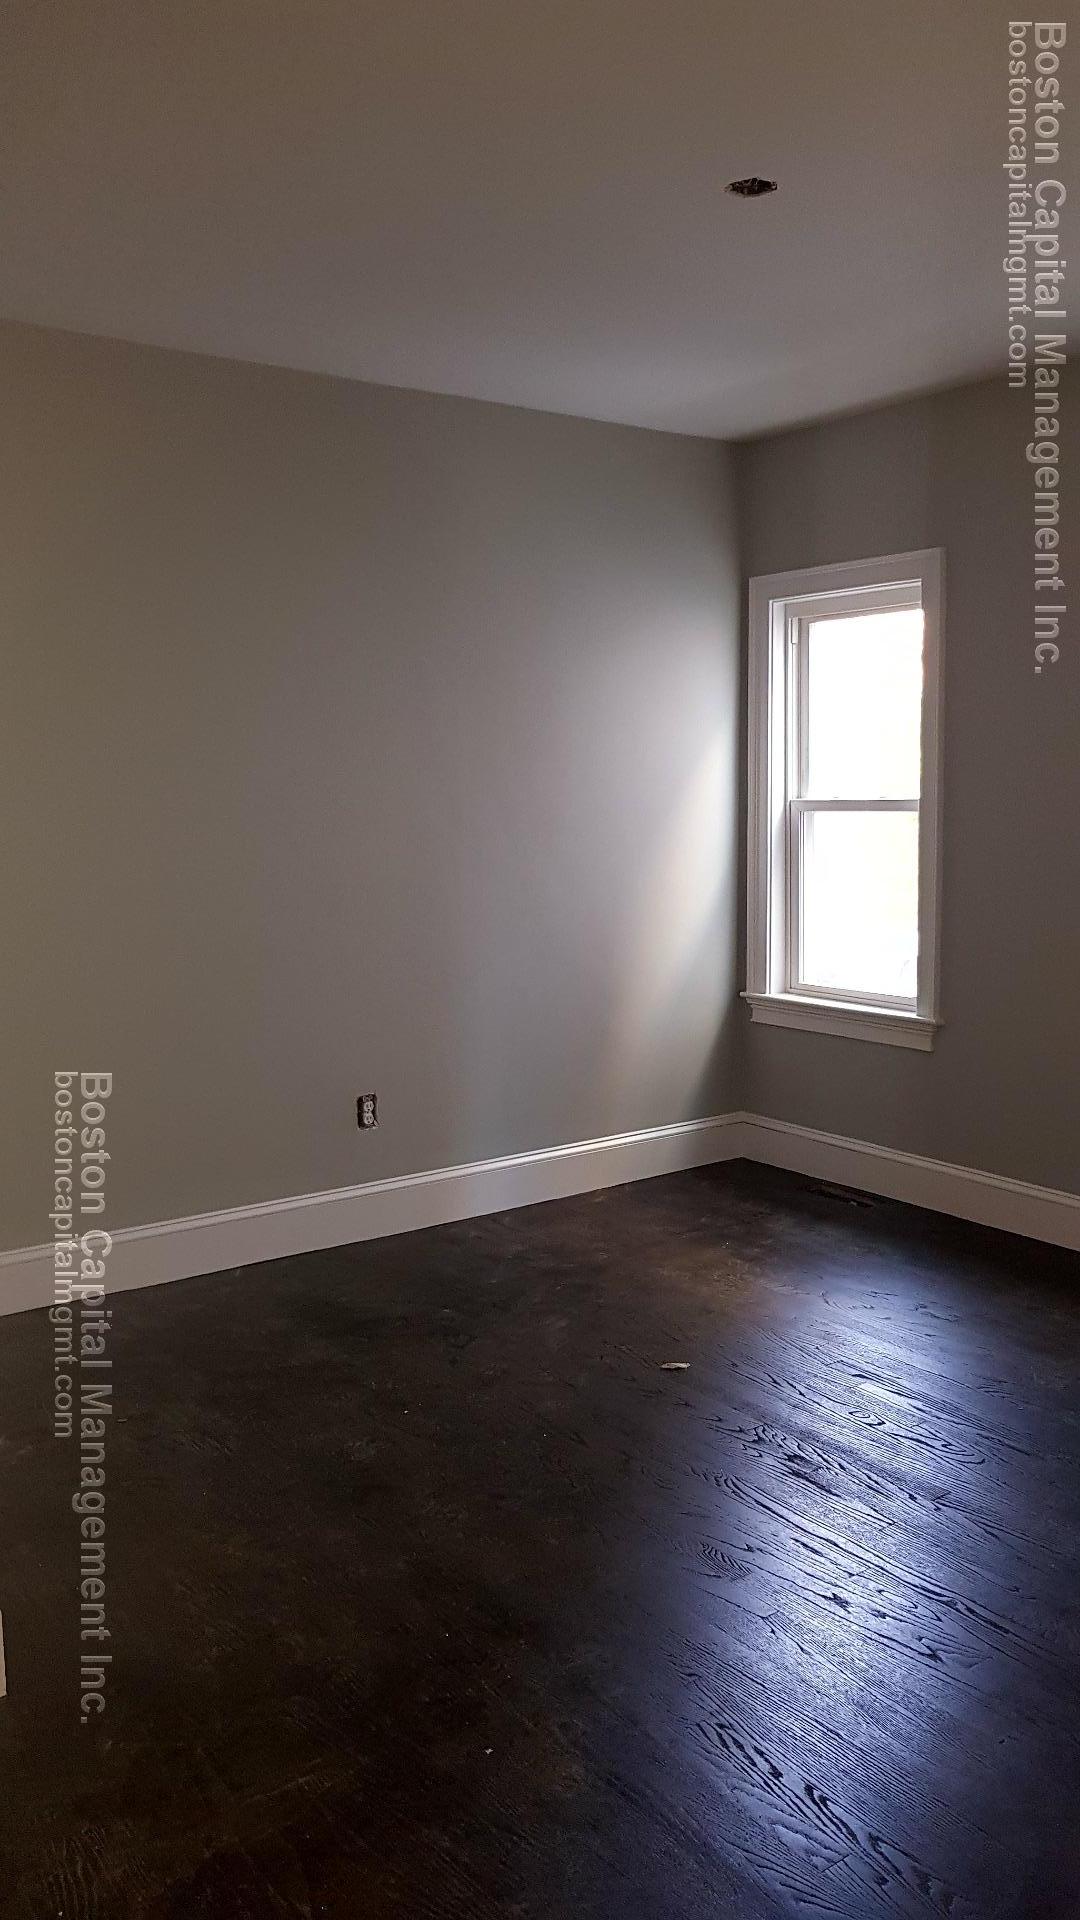 Photos of apartment on Grant St.,Somerville MA 02145